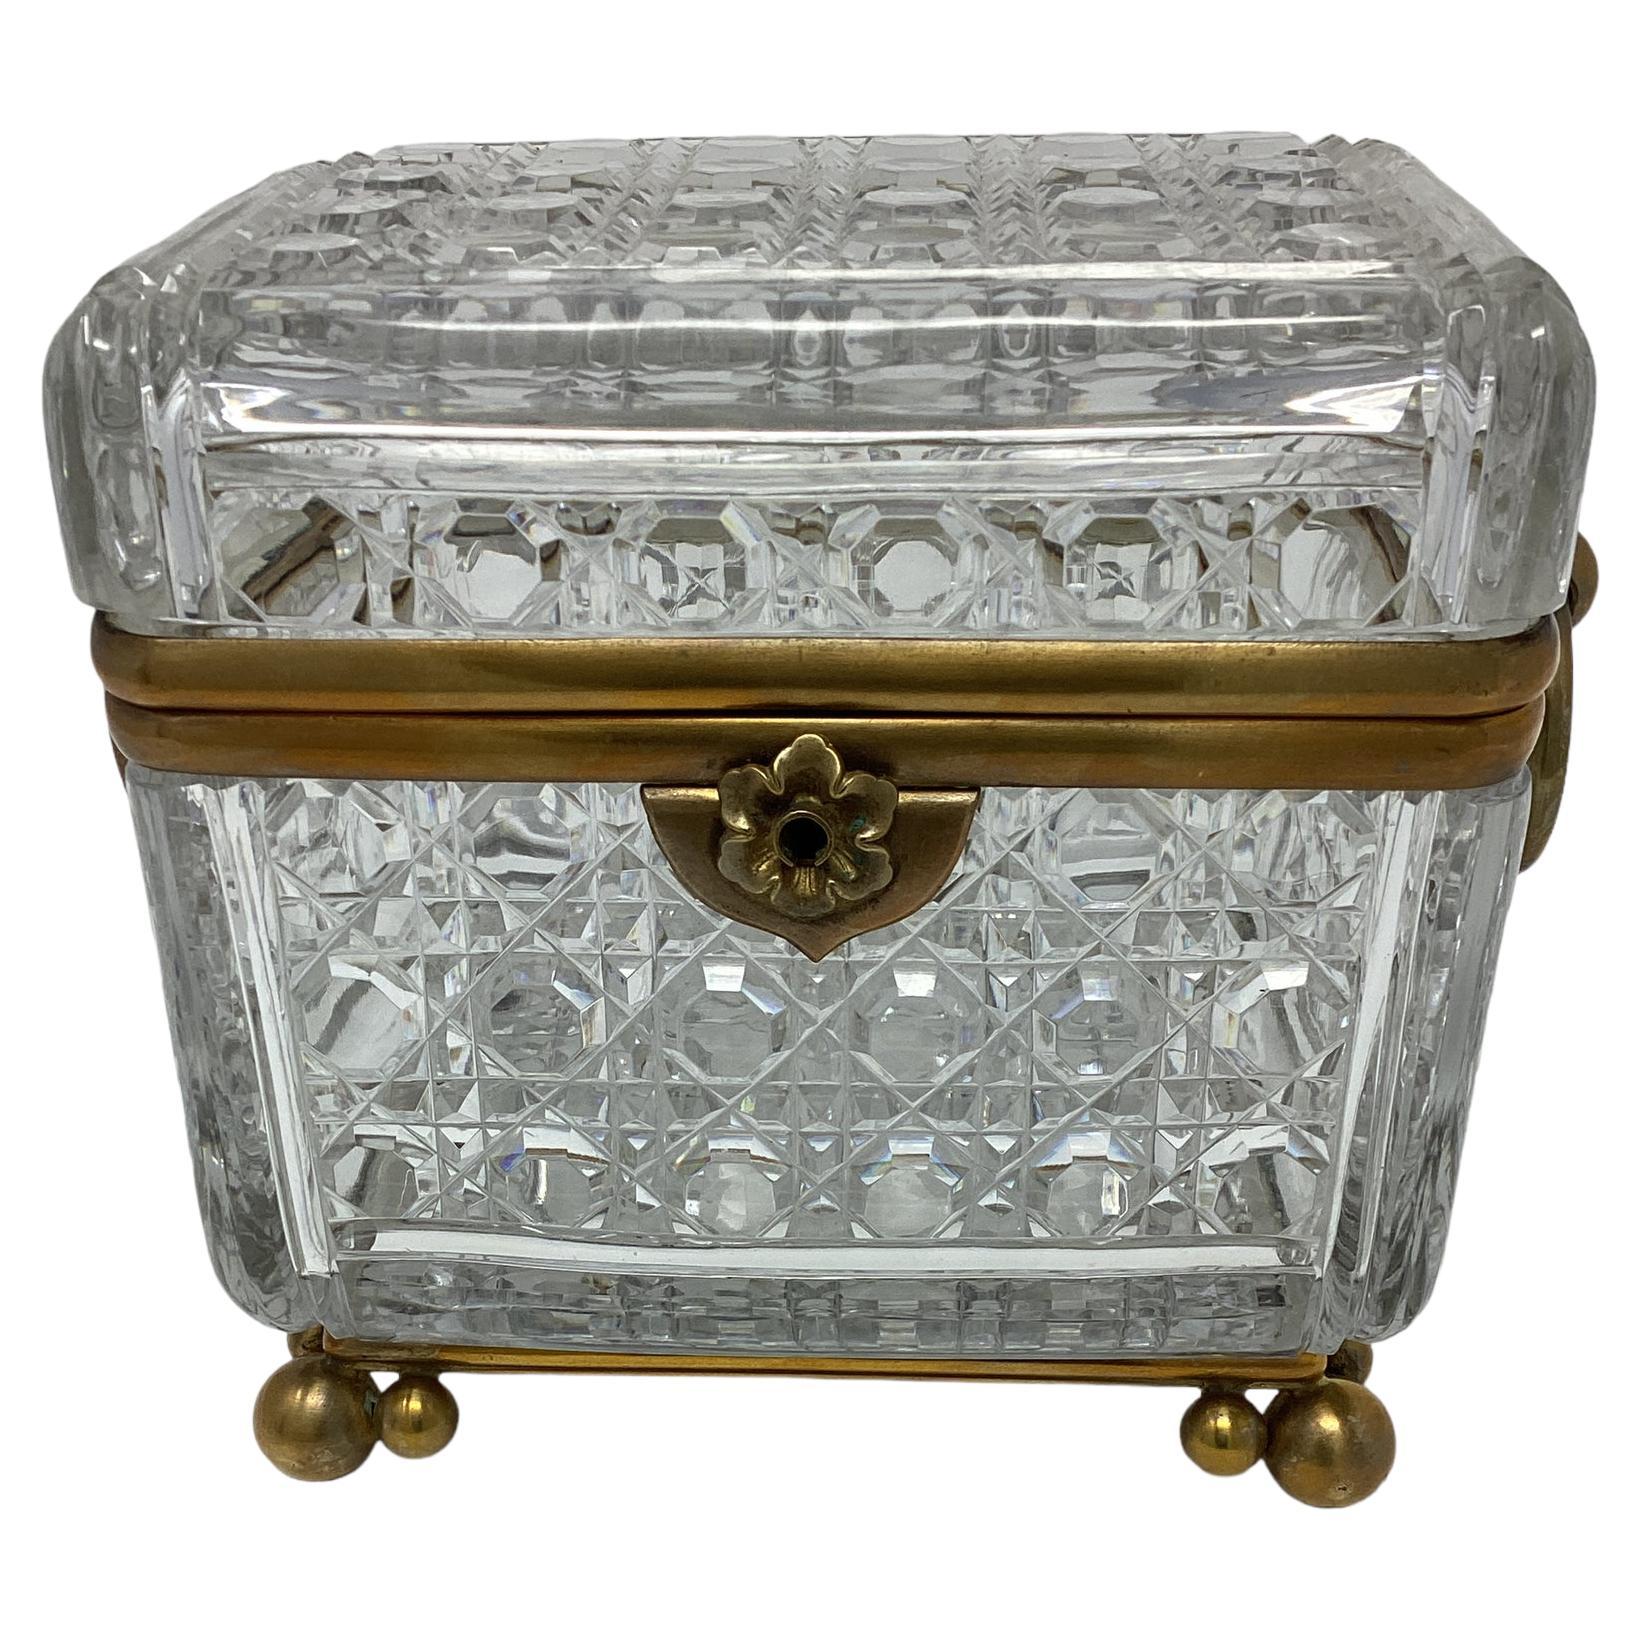 Antique French Crystal Box with Ring Handles. Heavy cut crystal in a diamond shaped design. The box sits on top of 3 round ball feet.